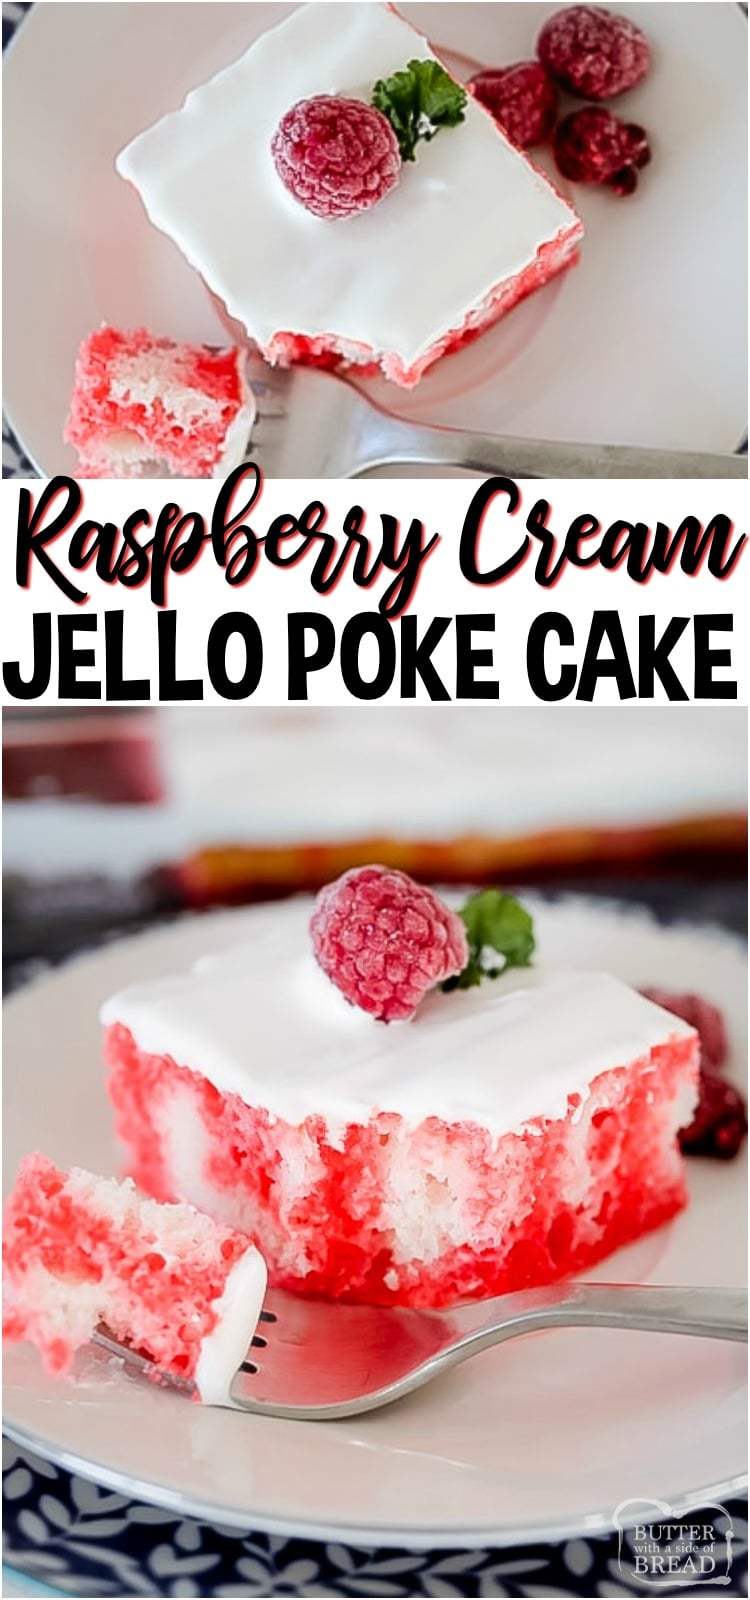 Raspberry Jello Poke Cake is a simple yet flavorful cake recipe. White cake infused with raspberry jello topped with cream to make one memorable, easy poke cake! #cake #pokecake #raspberry #berry #baking #dessert #whippedcream from BUTTER WITH A SIDE OF BREAD